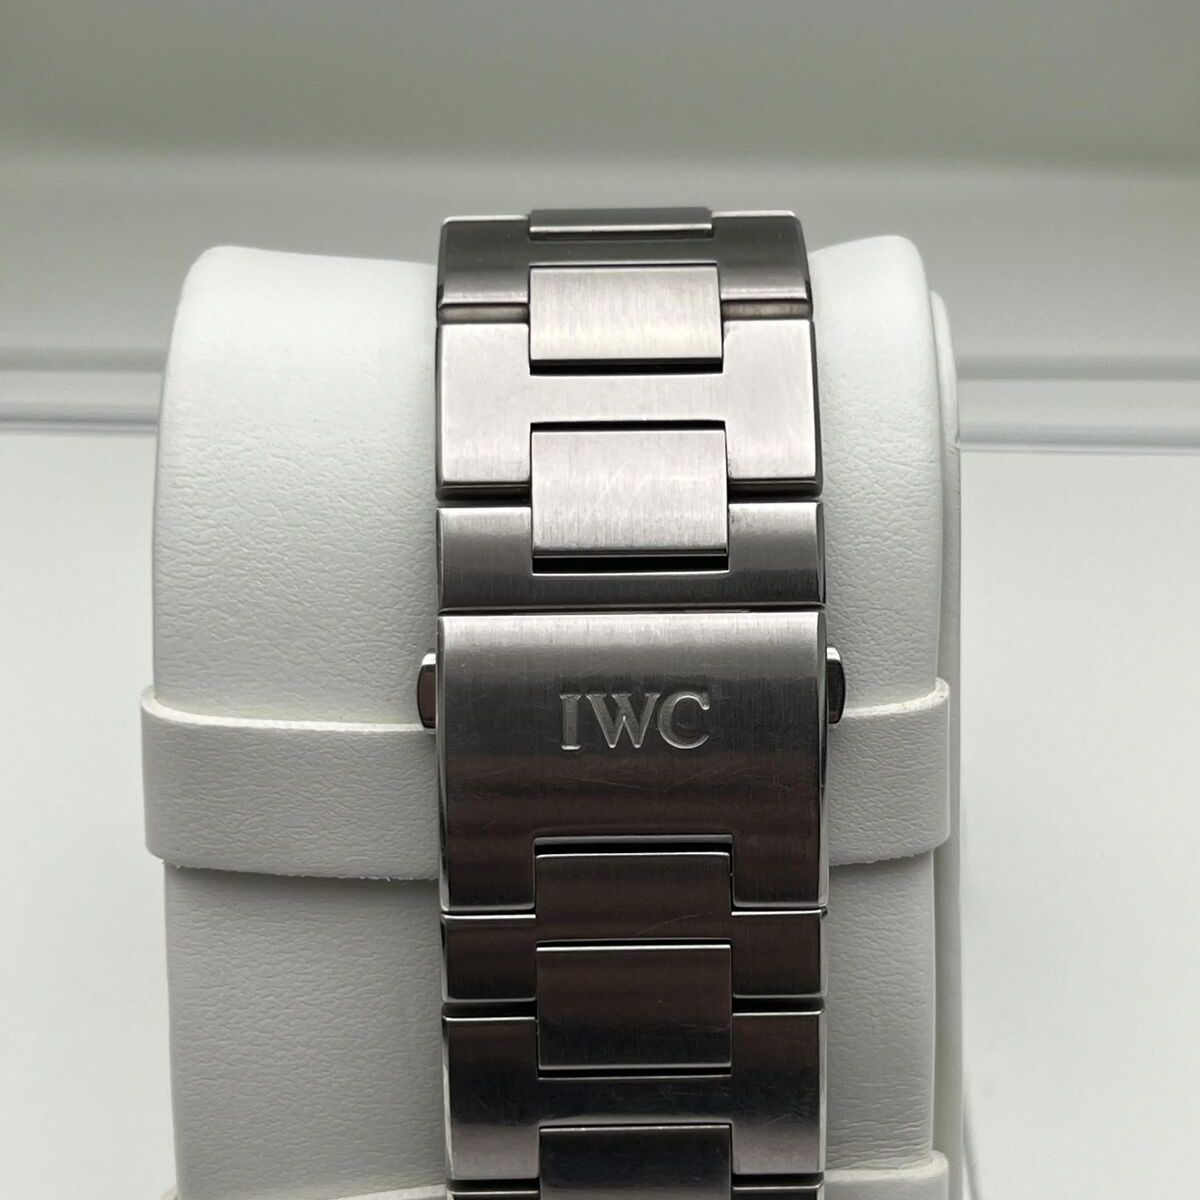 IWC Aquatimer Chronograph for R84 362 for sale from a Trusted Seller on  Chrono24